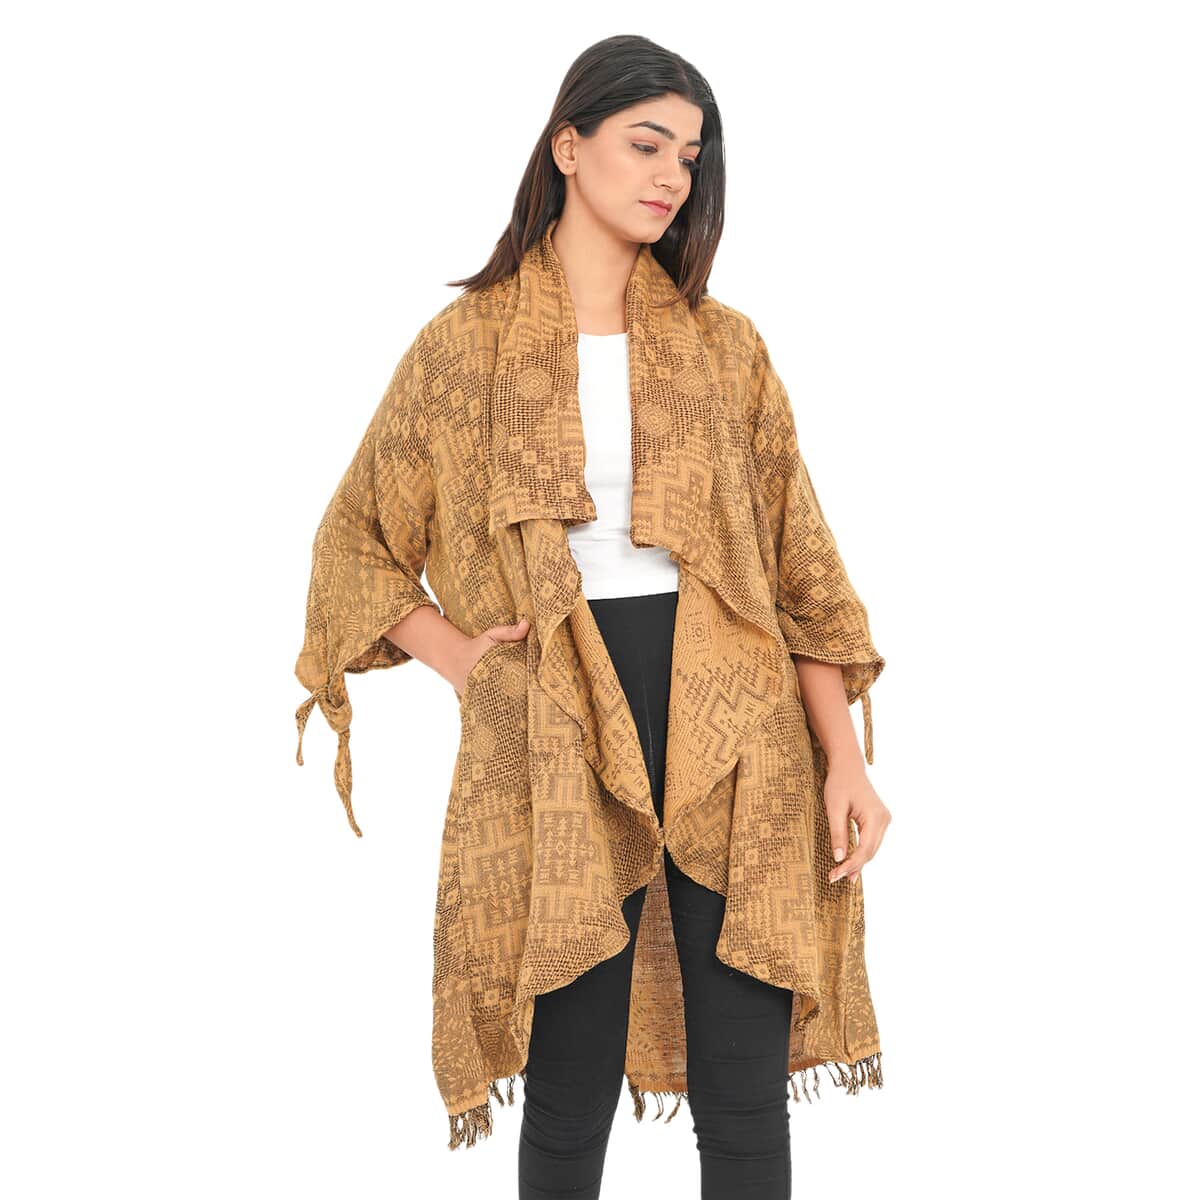 Passage Gold 100% Cotton Double Layer Jacquard Front Waterfall Cardigan - One size Plus, Cotton Cardigan, Women Cardigan, Maxi Cardigan, Summer Cardigan image number 2